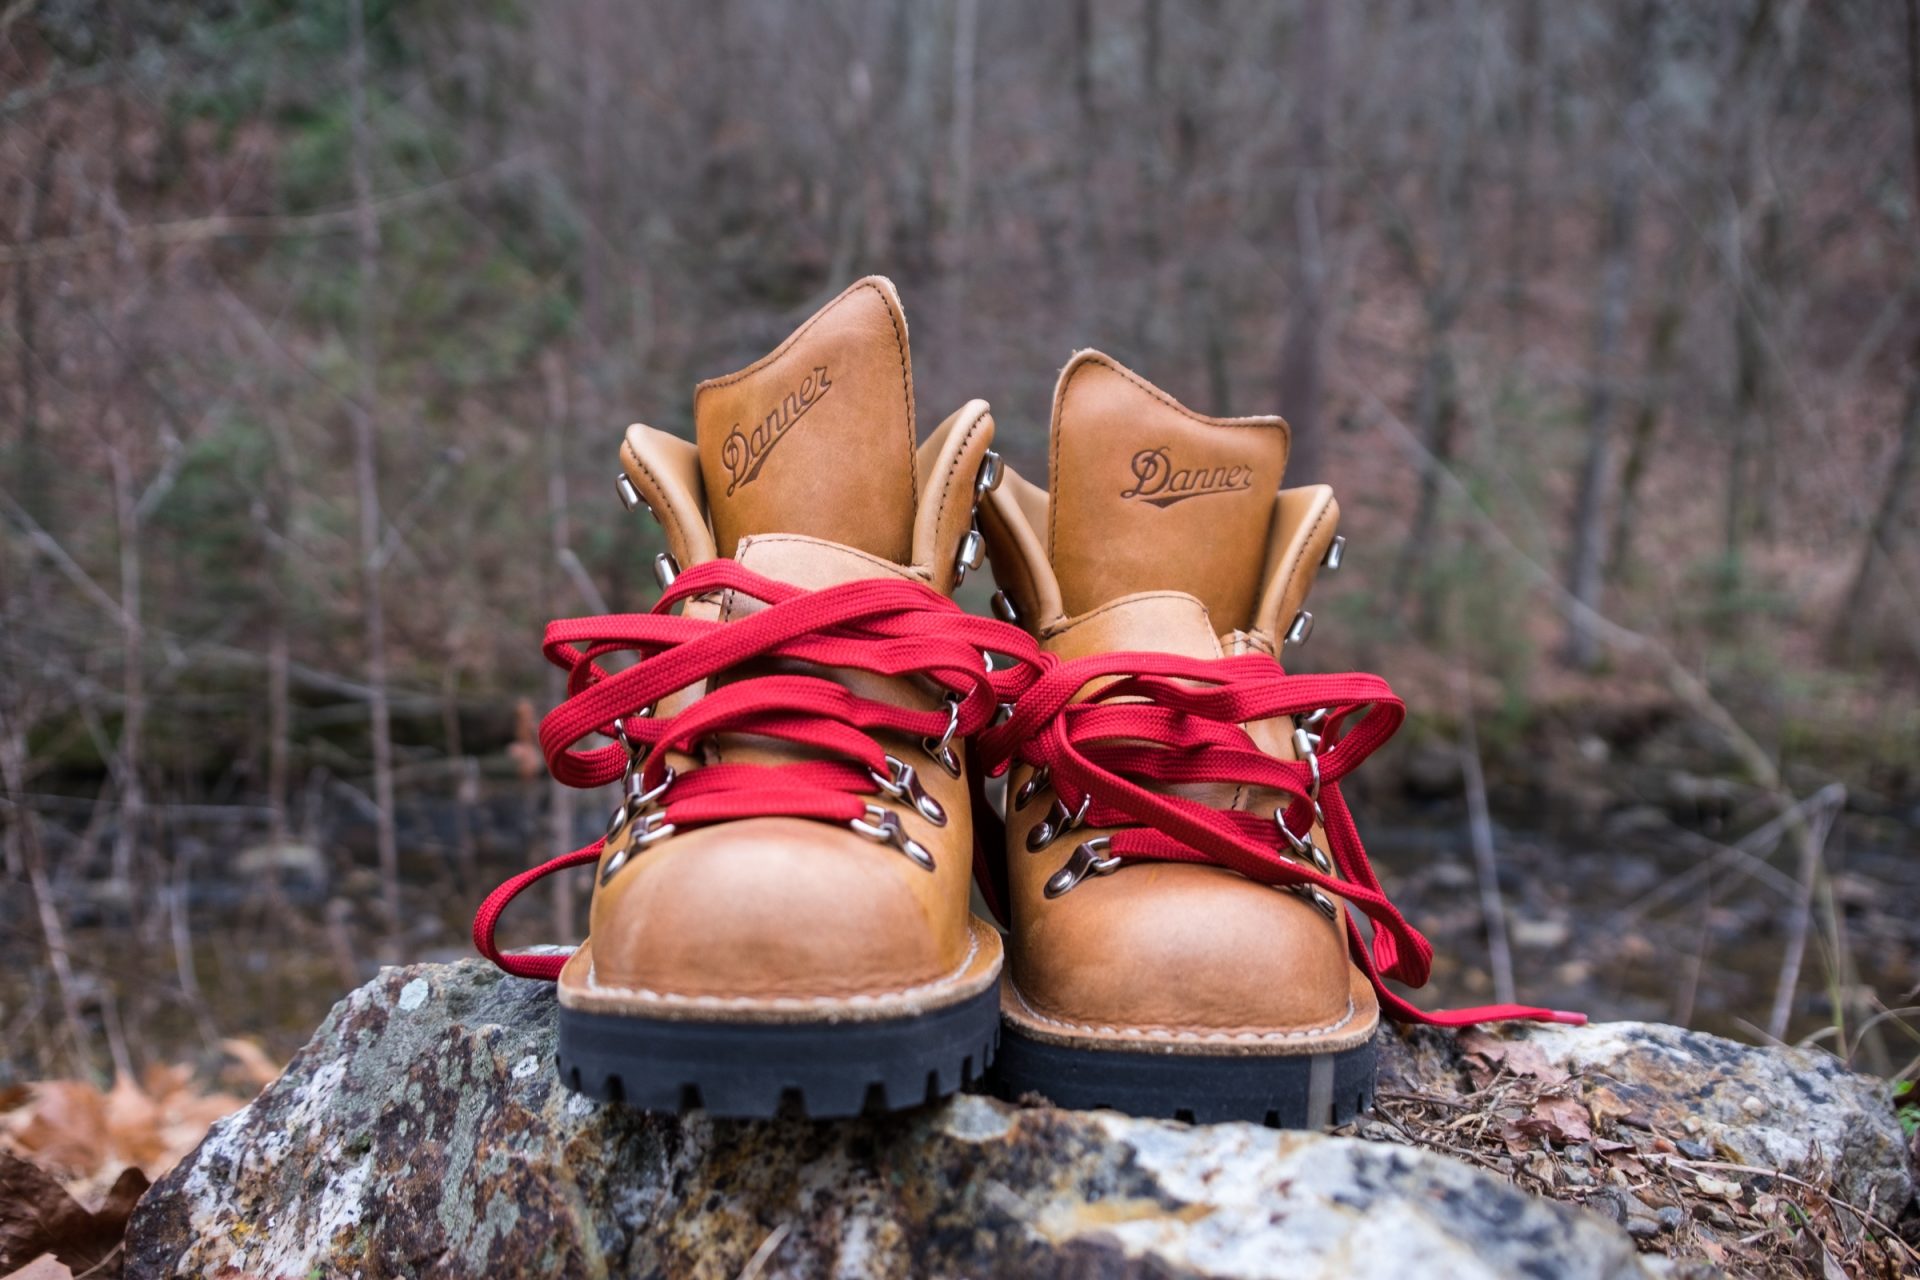 Why do hiking boots have red laces?